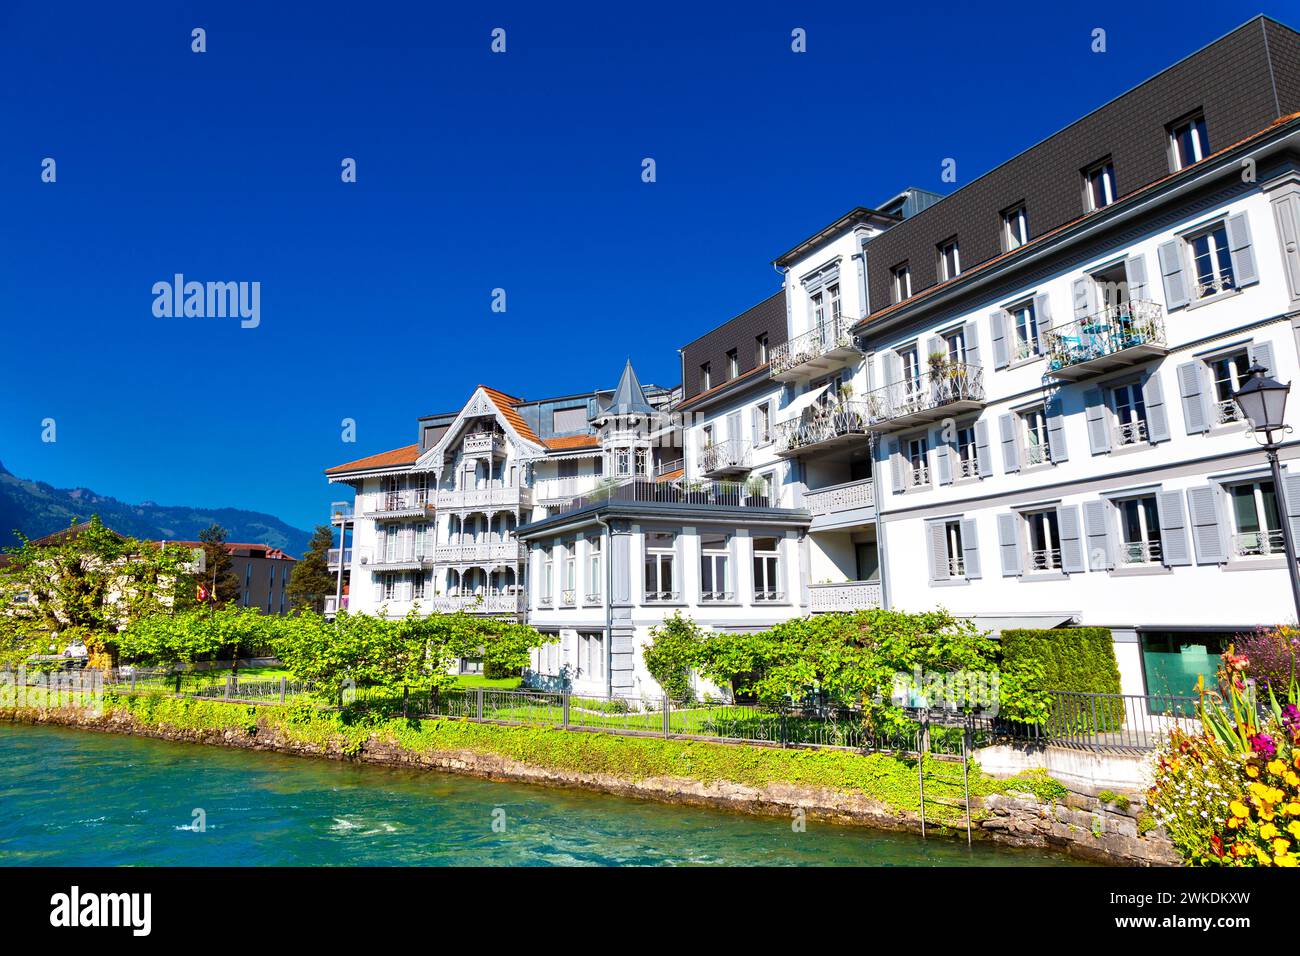 Houses at the riverside of the Aare River, Unterseen, Switzerland Stock Photo